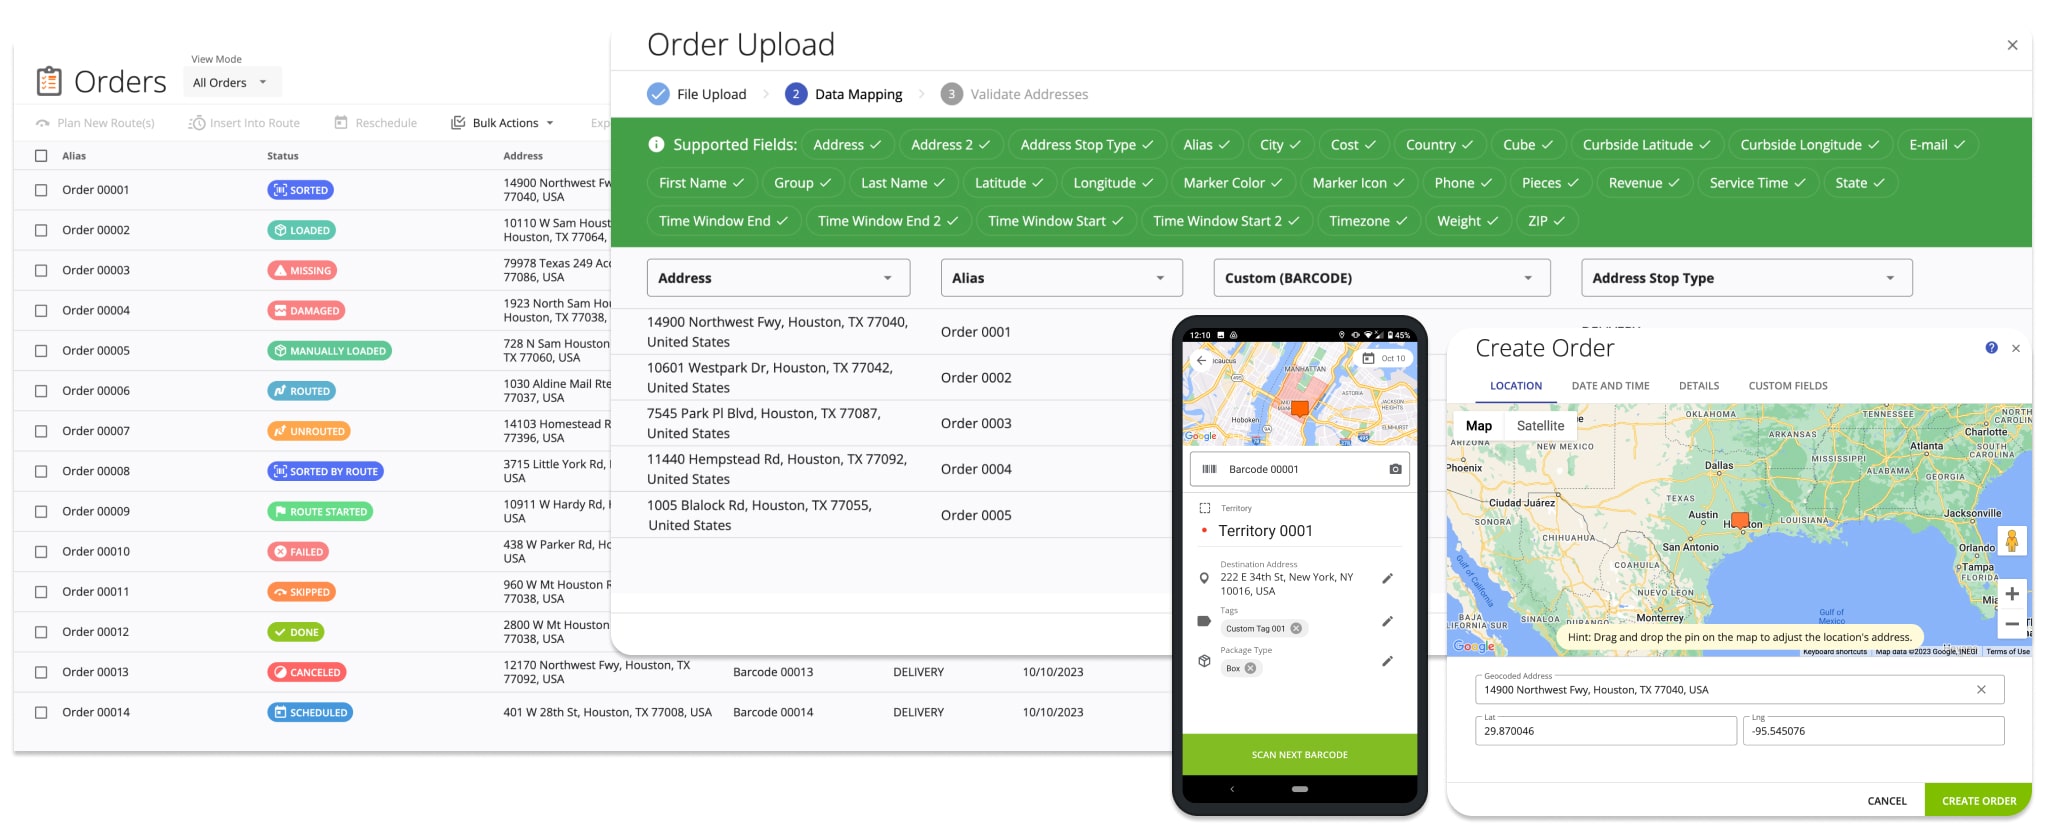 Add, upload, and automatically import orders through API into Route4Me's Order Delivery Management System.